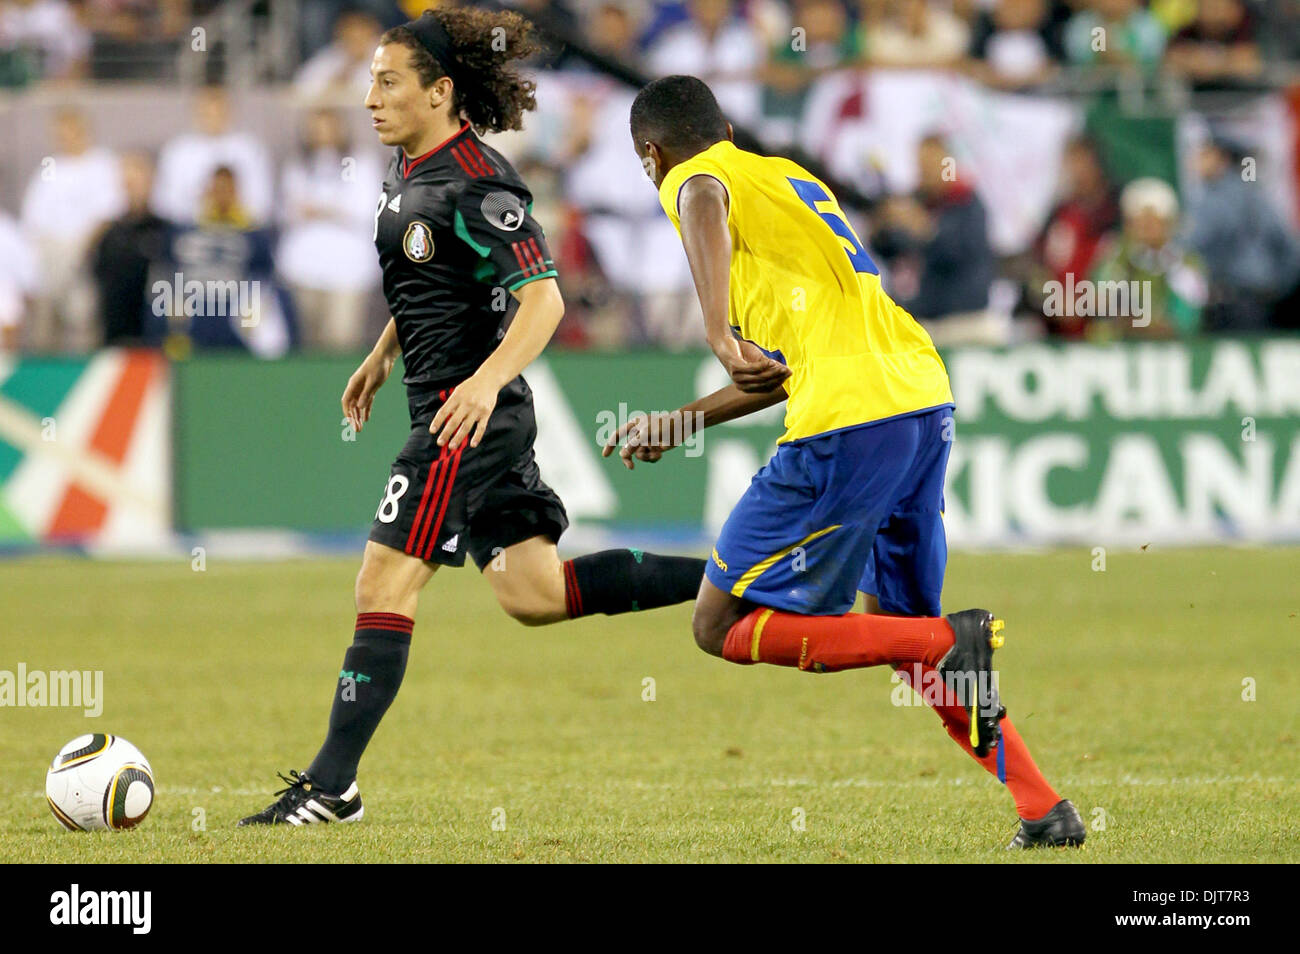 07 May  2010:  Mexico Midfielder Andres Guardado (#18) changes the field with Ecuador Midfielder Oswaldo Minda (#5) approaching. At the end, the game is scoreless  at New Meadowlands Stadium, Rutherford, NJ. (Credit Image: © Anthony Gruppuso/Southcreek Global/ZUMApress.com) Stock Photo